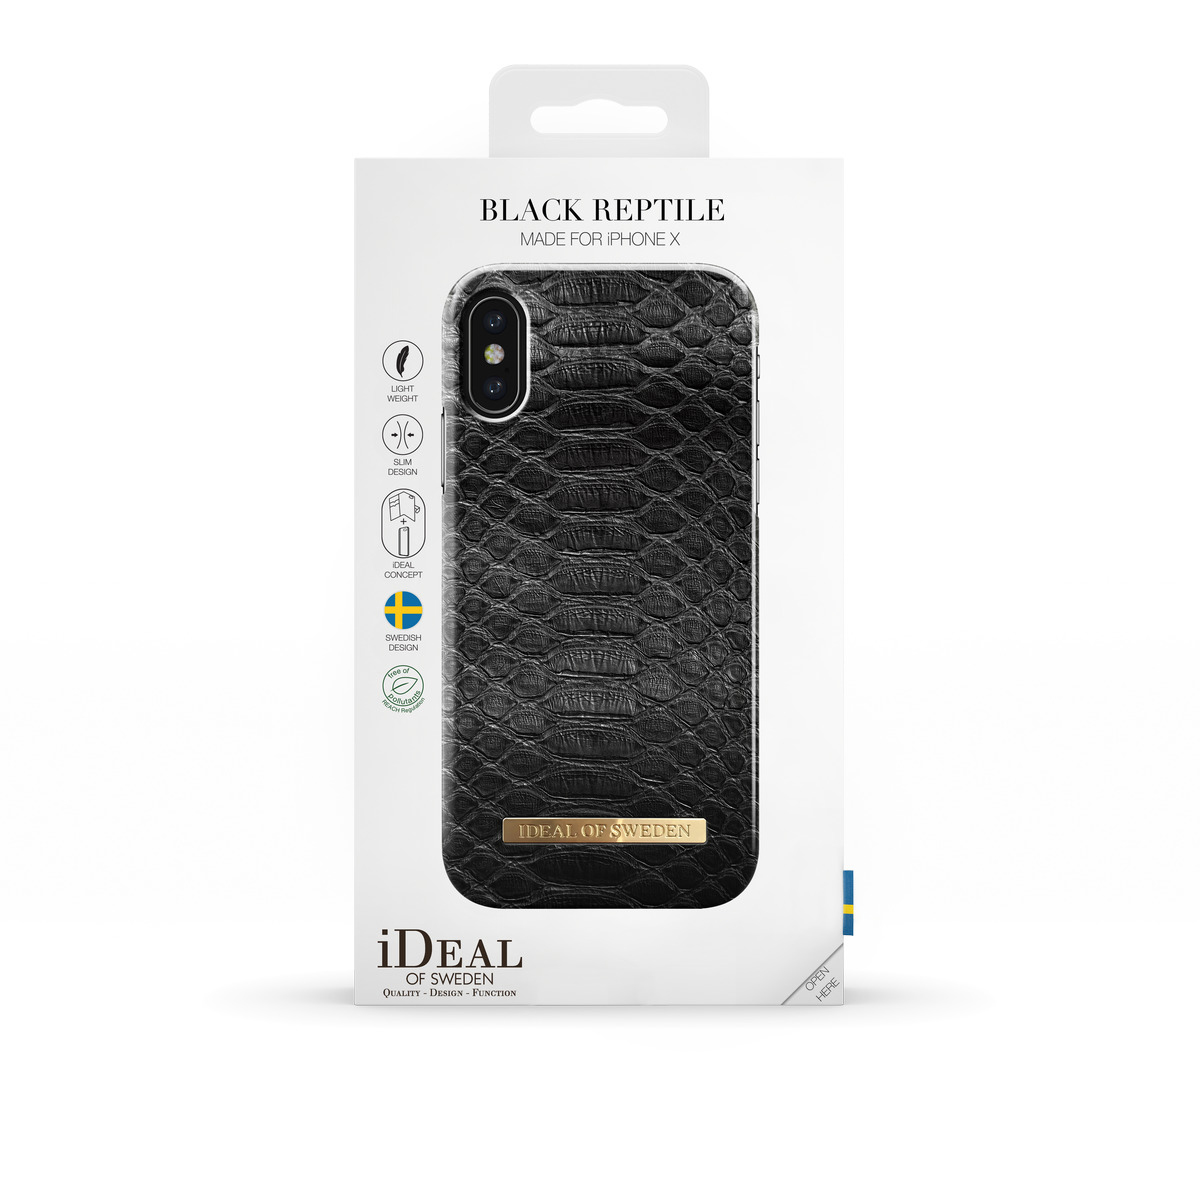 Apple, SWEDEN OF X, IDEAL Backcover, Reptile Black Fashion, iPhone